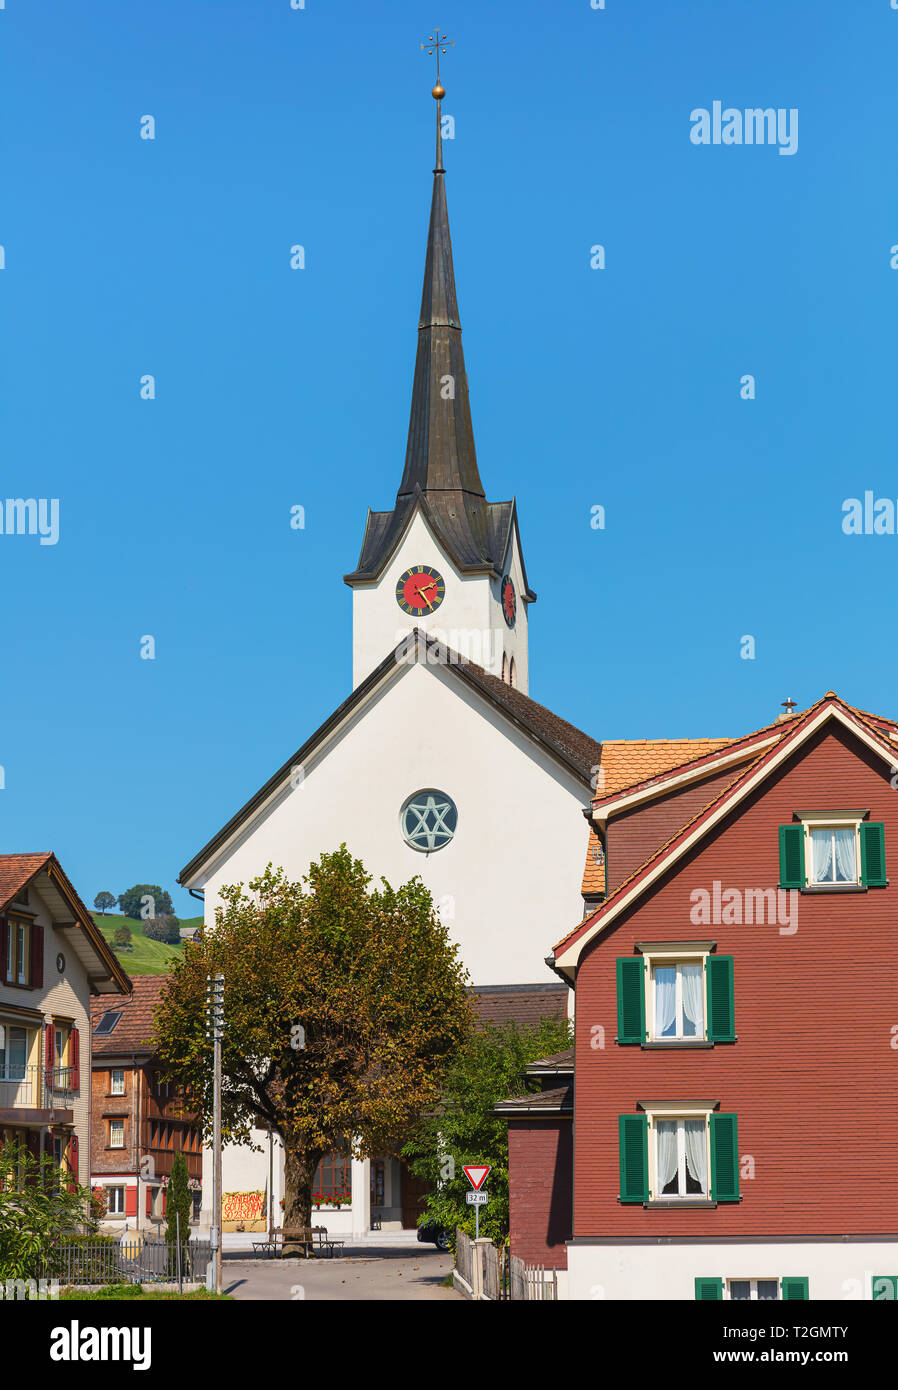 Gonten, Switzerland - September 20, 2018: the St. Verena church in Gonten. Gonten is a district of the Swiss canton of Appenzell Innerrhoden, it was f Stock Photo